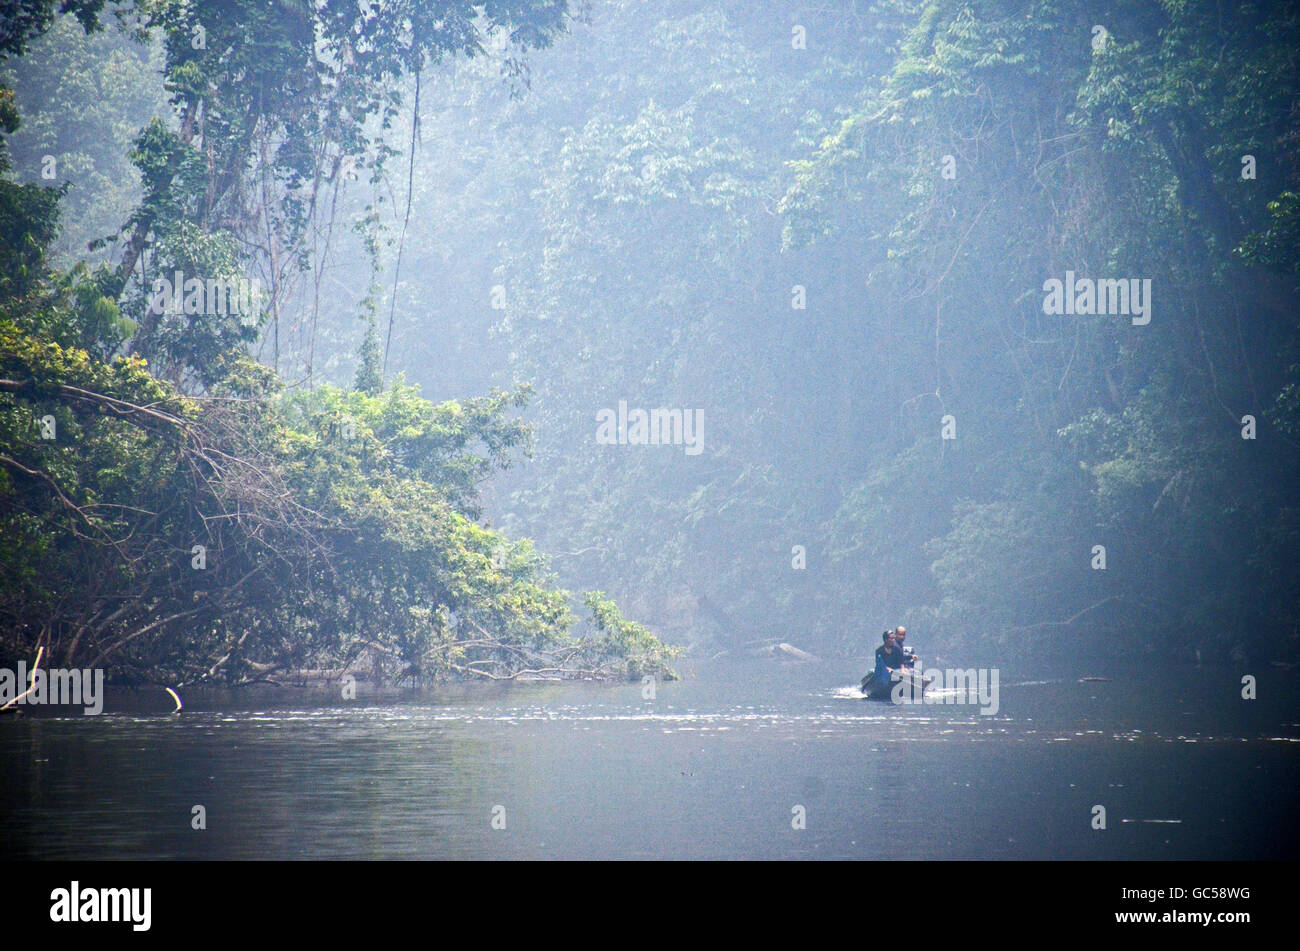 A small boat heads upstream on the Tahan River at Lubok Simpon swimming area, Taman Negara National Park, Malaysia Stock Photo